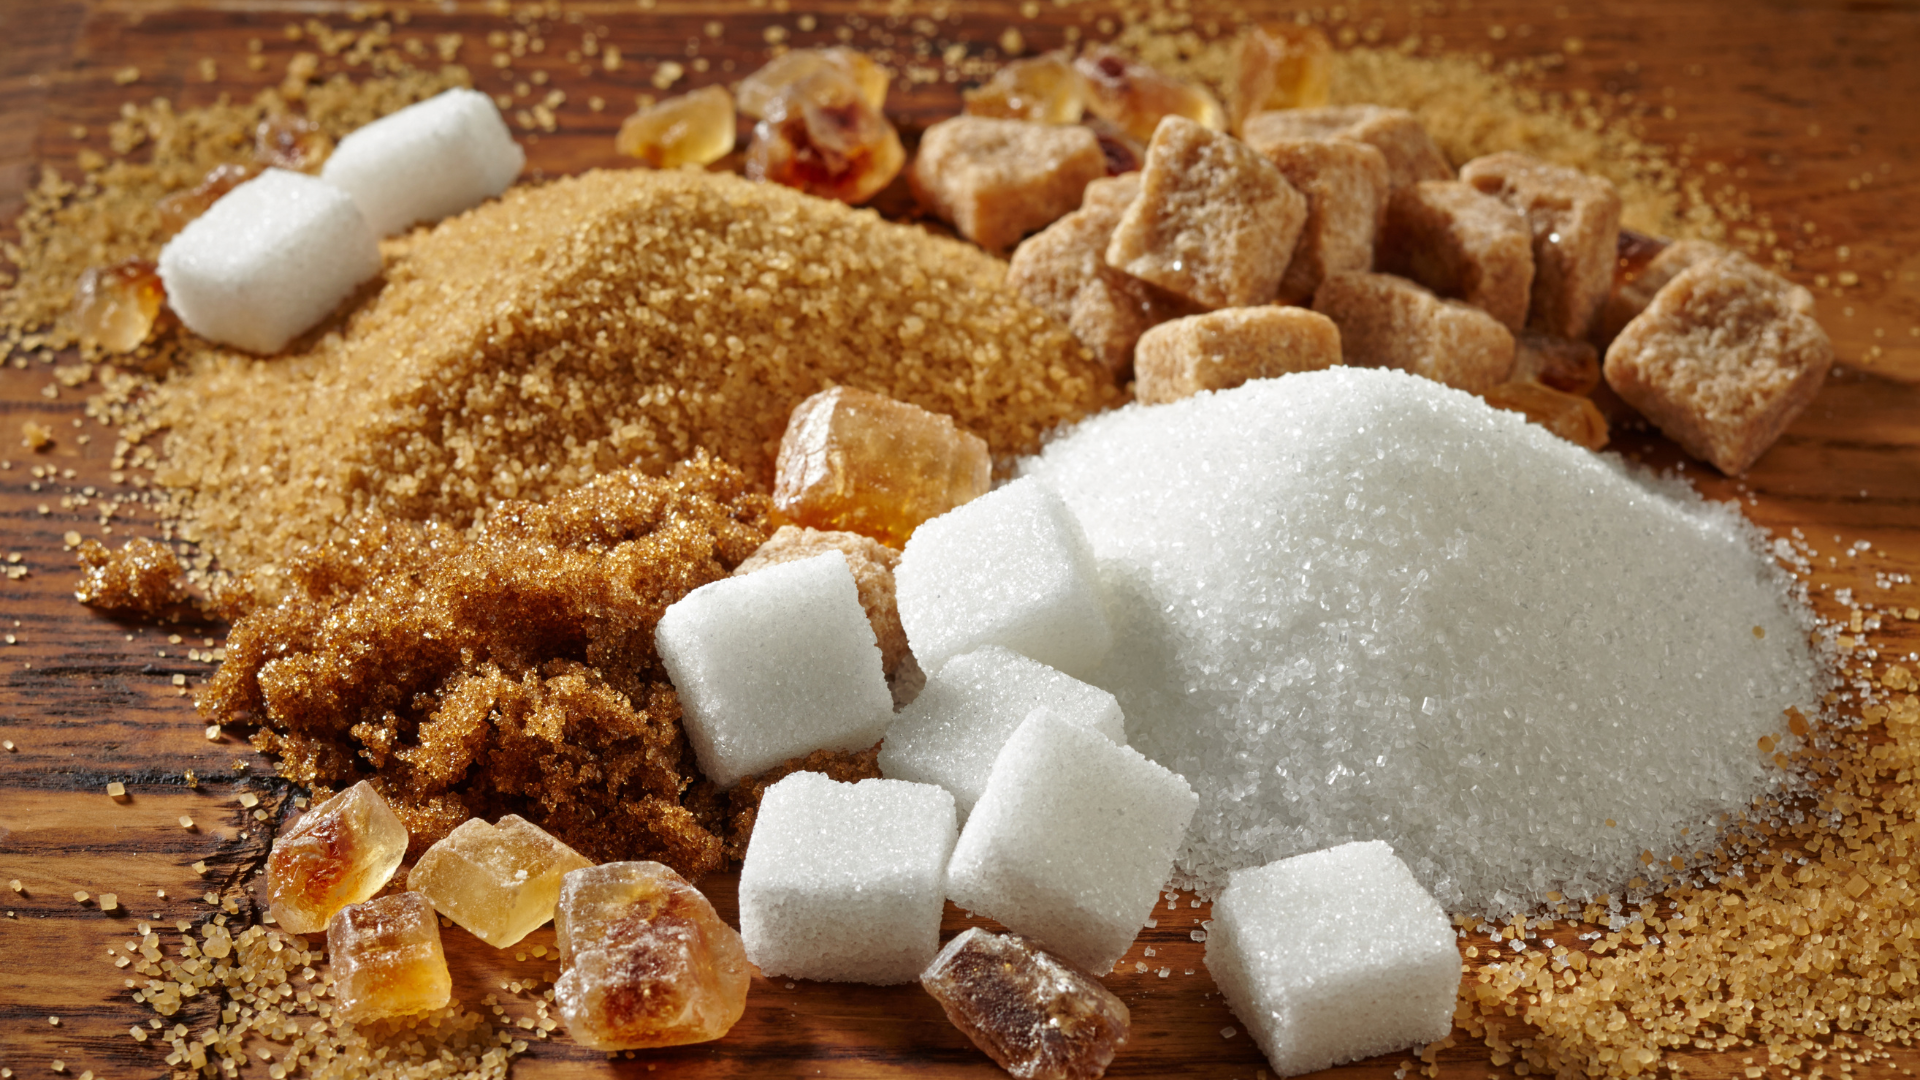 What You Should Know About Sugar